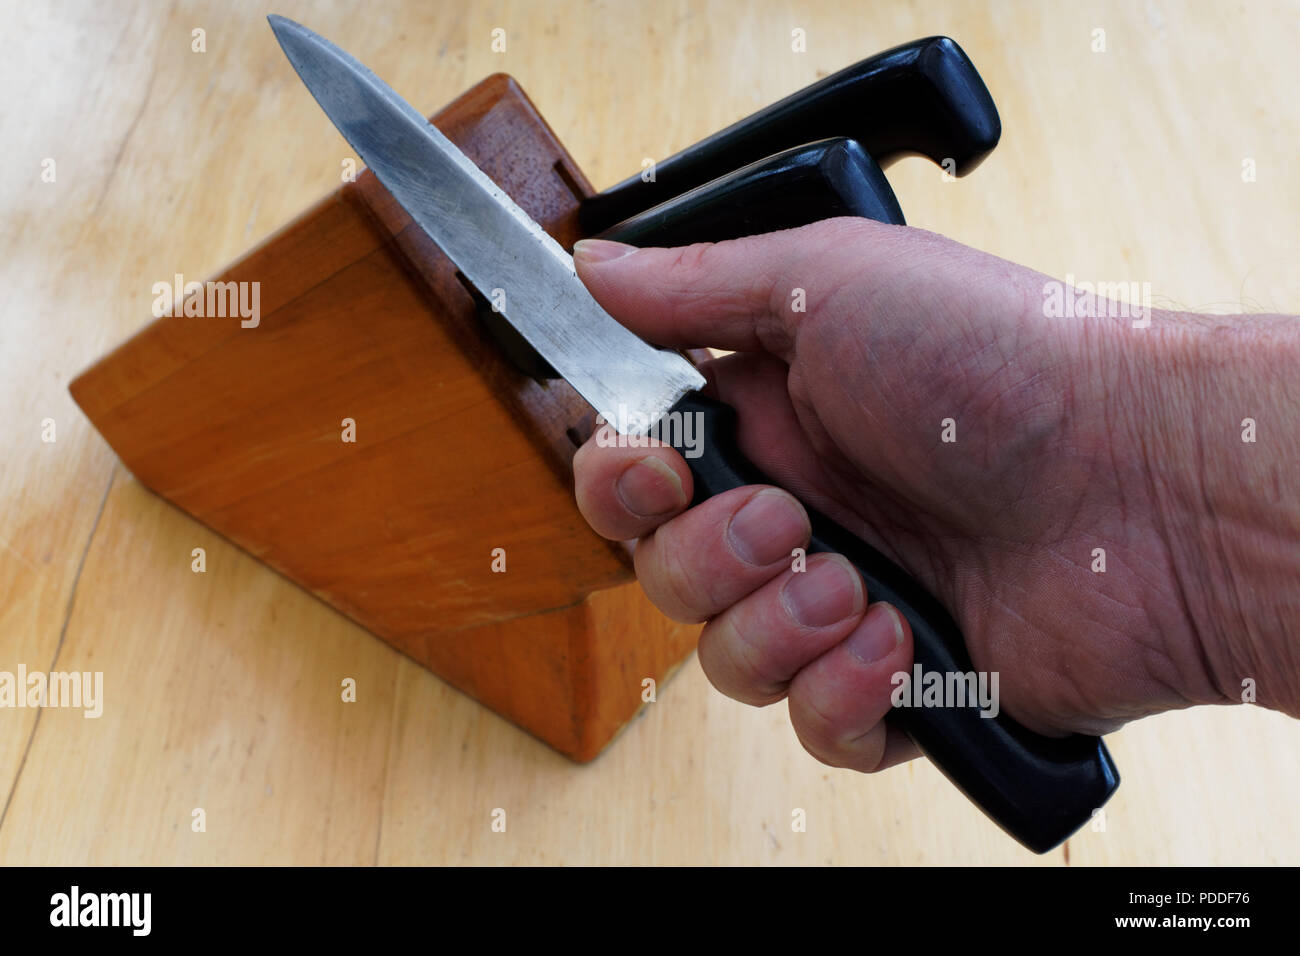 A hand holding a knife taken from a knife block and the thumb pressing on the blade to test its sharpness. It's not the sharpest knife in the block. Stock Photo